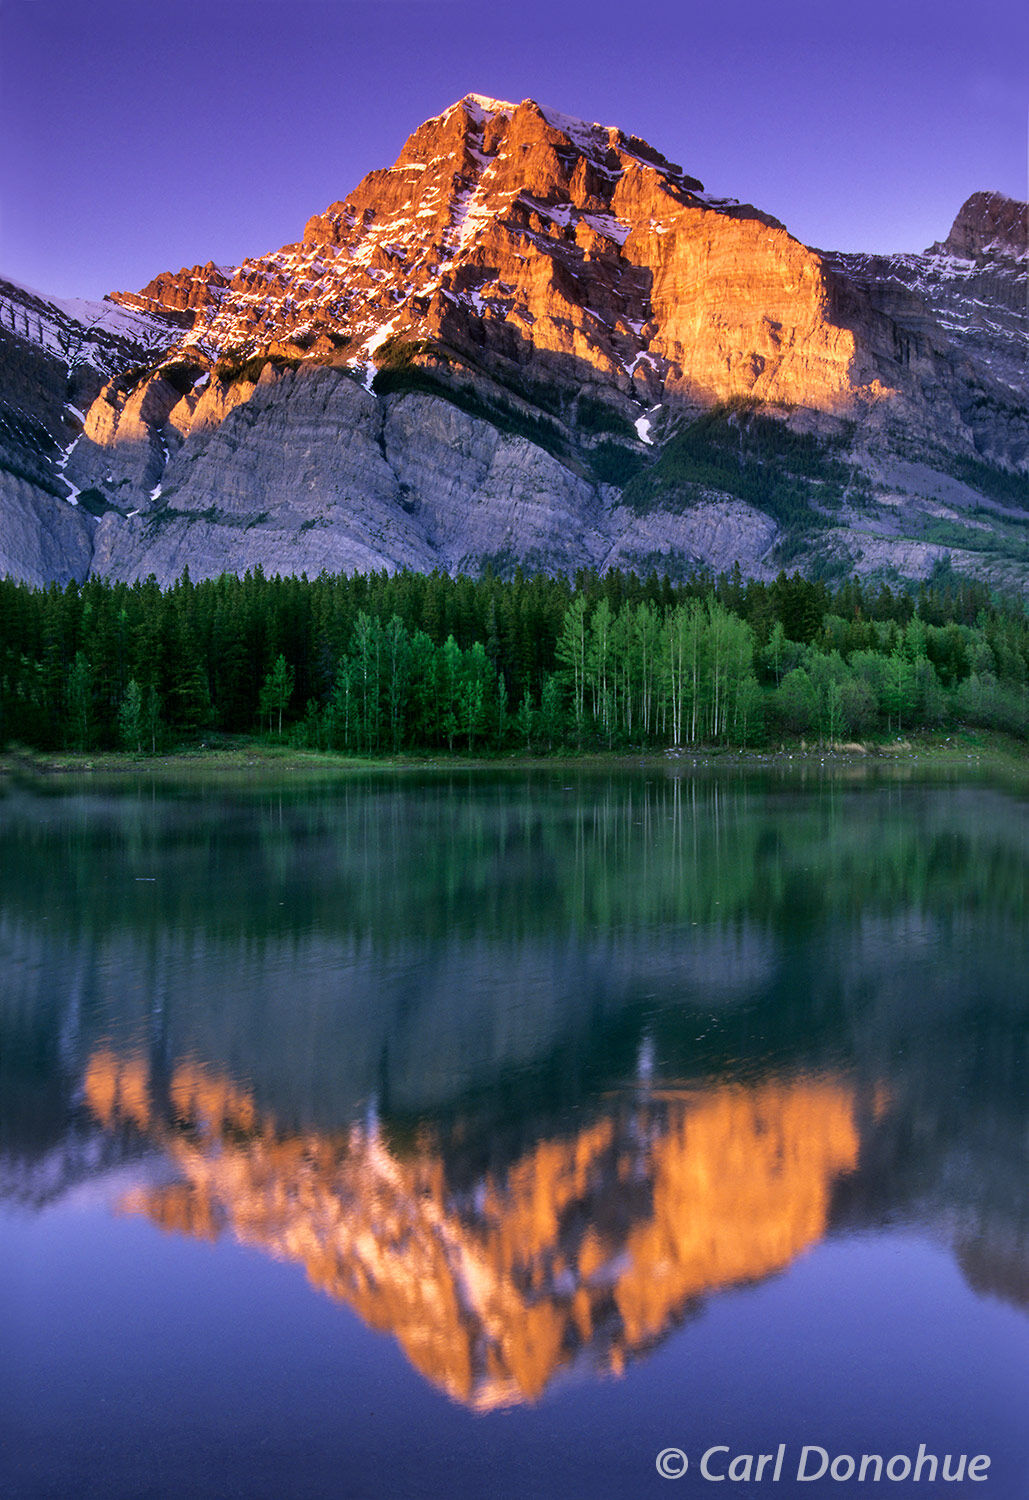 Mount Kidd at dawn. Reflections in Wedge Pond and dawn's alpenglow light up Mount Kidd, Upper Kananaskis Lakes, Day Use area...